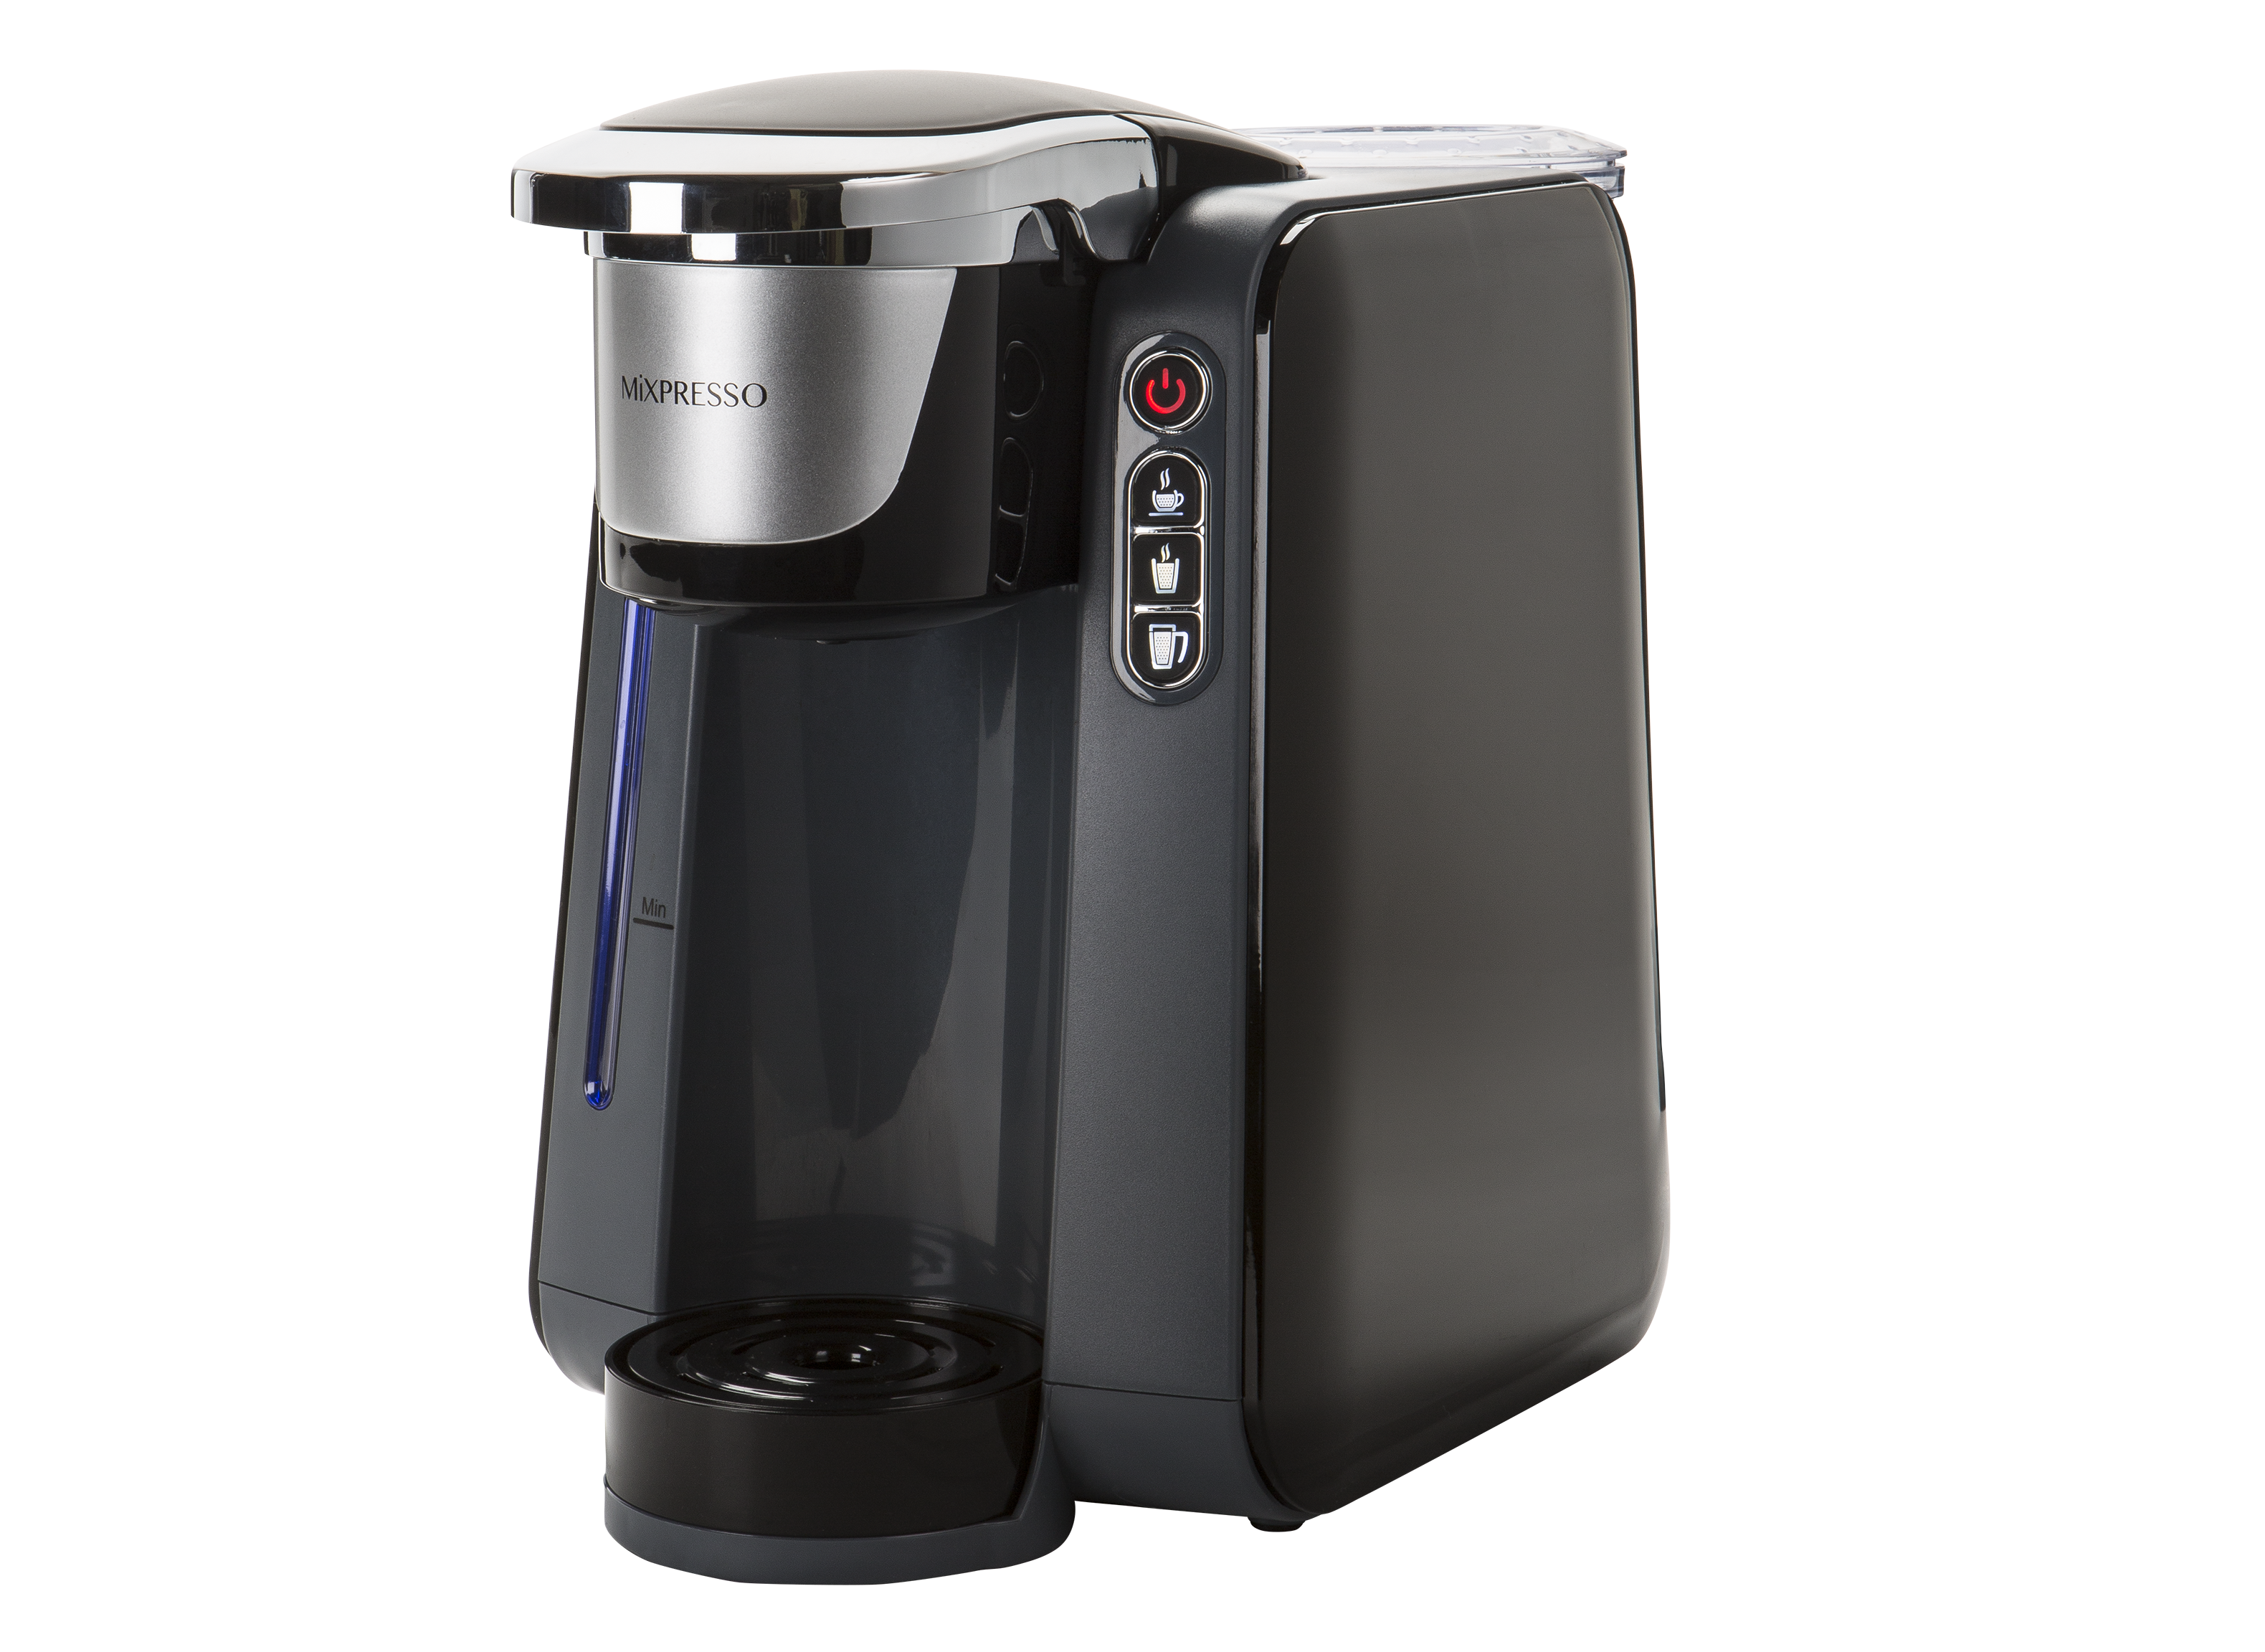 Mixpresso Single Cup K4GRY00 Coffee Maker Review - Consumer Reports